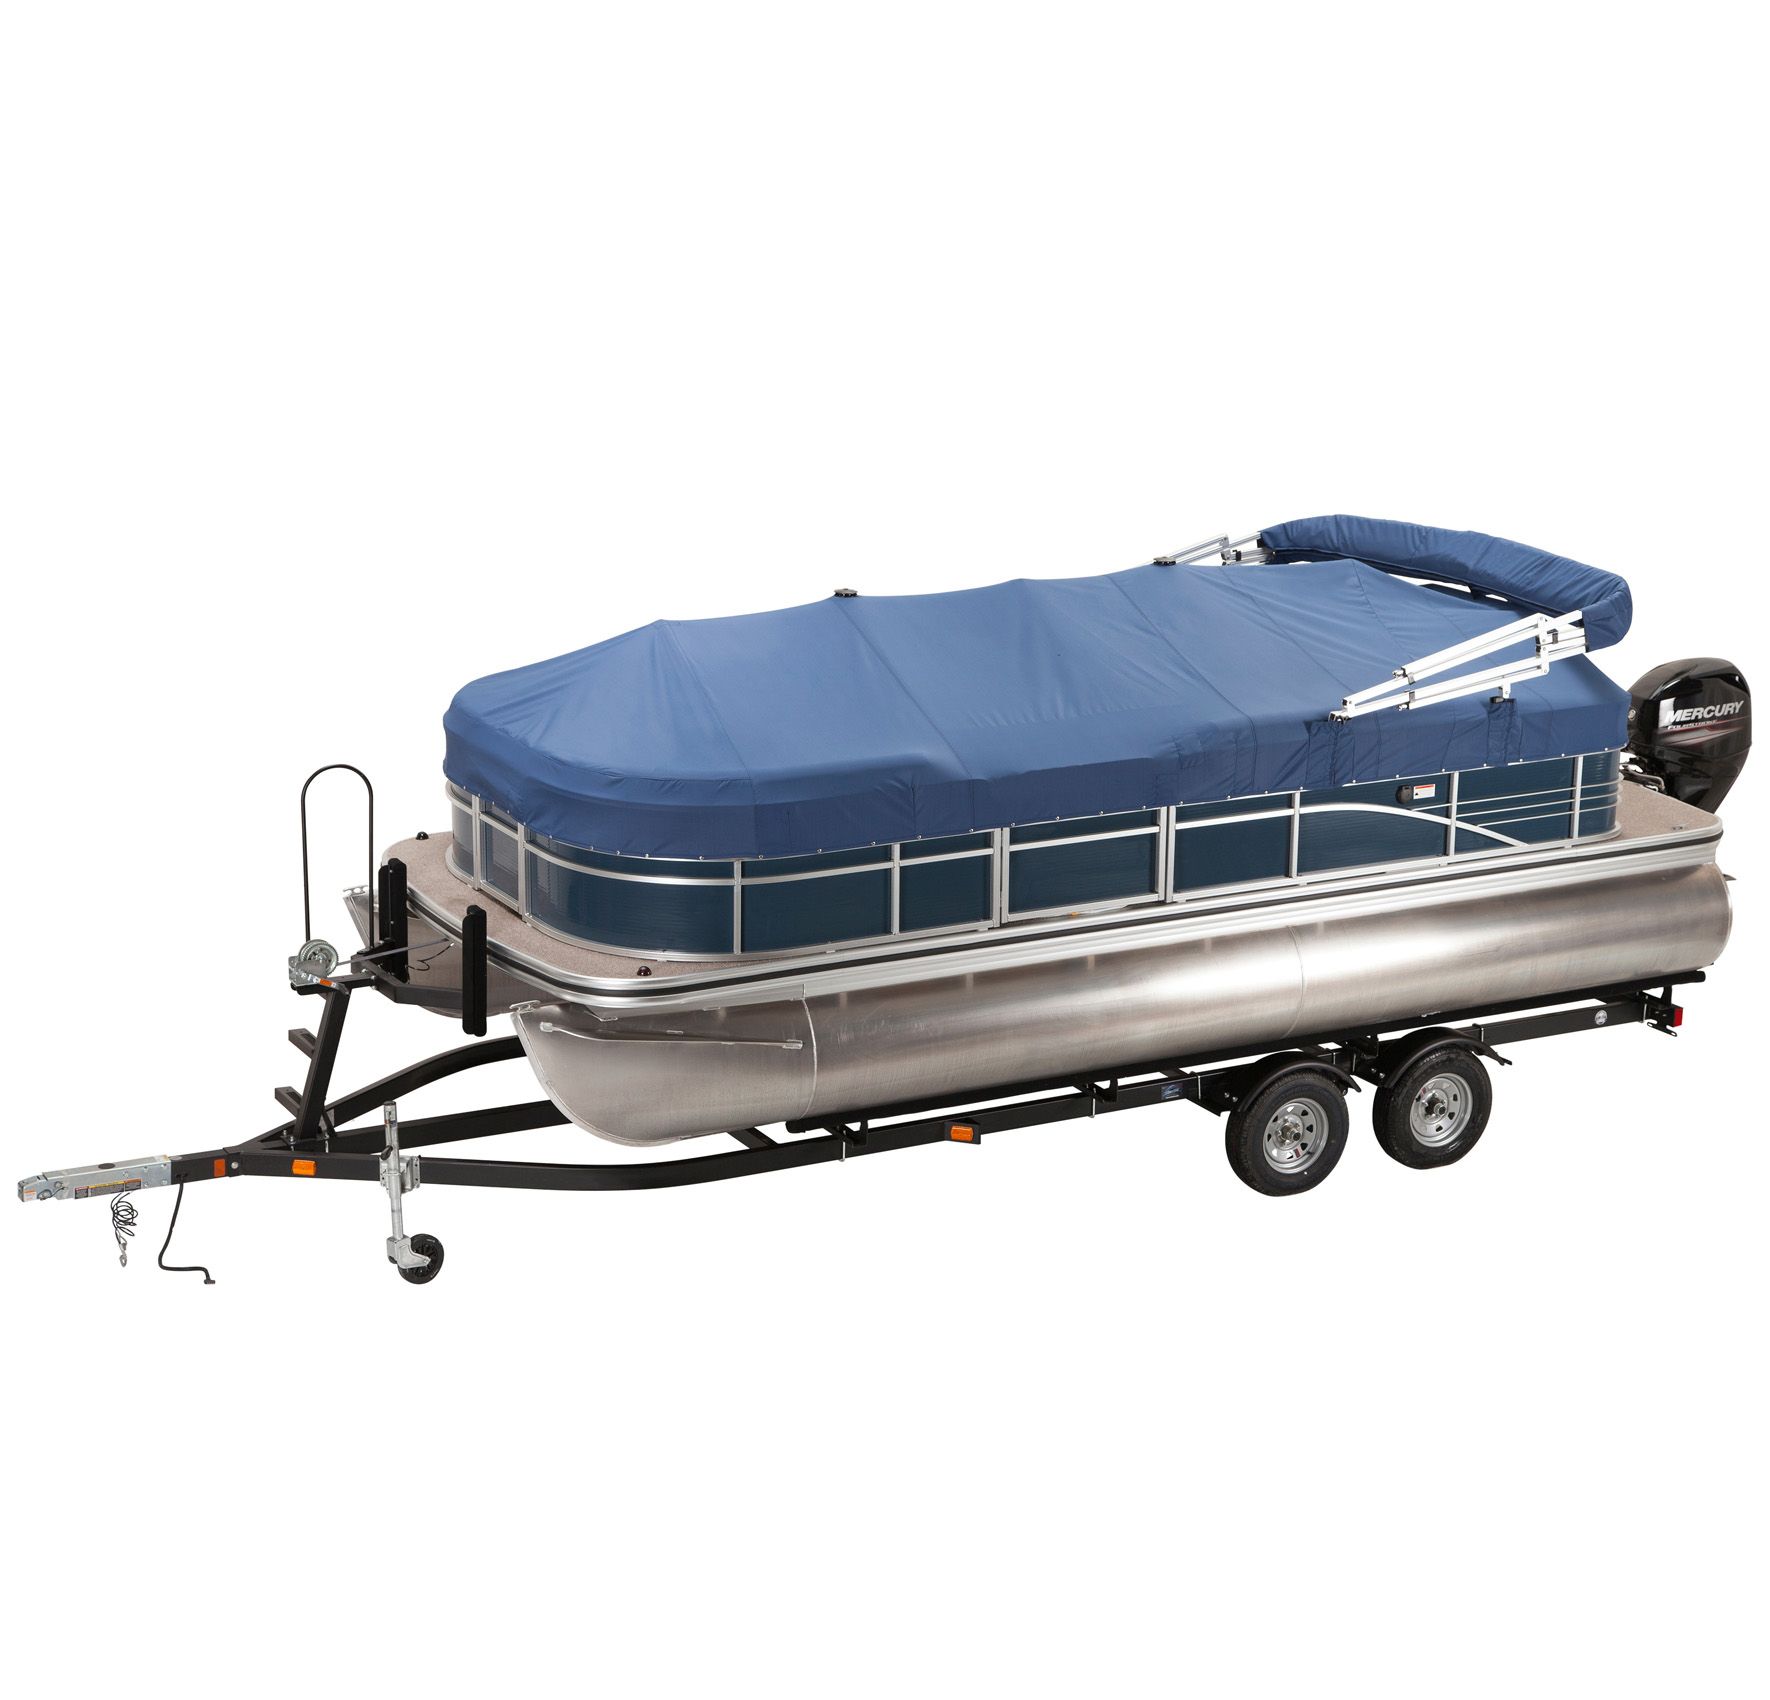 PONTOON COVER - Boat Cover